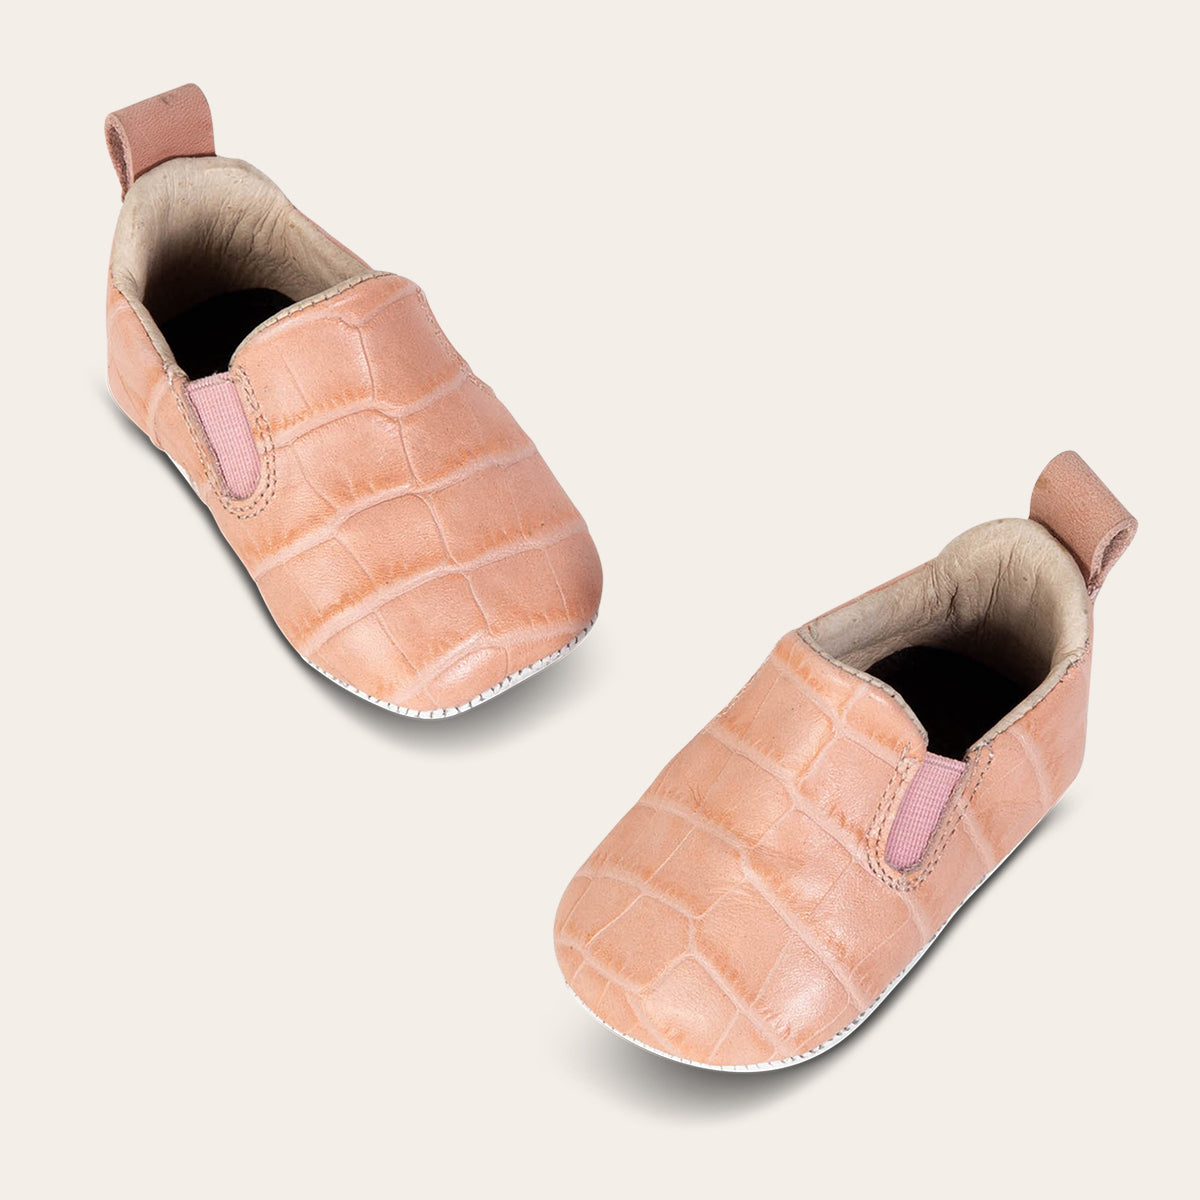 top view showing heel pull tab and side elastic panel on FREEBIRD infant baby kicks pink croco leather shoe